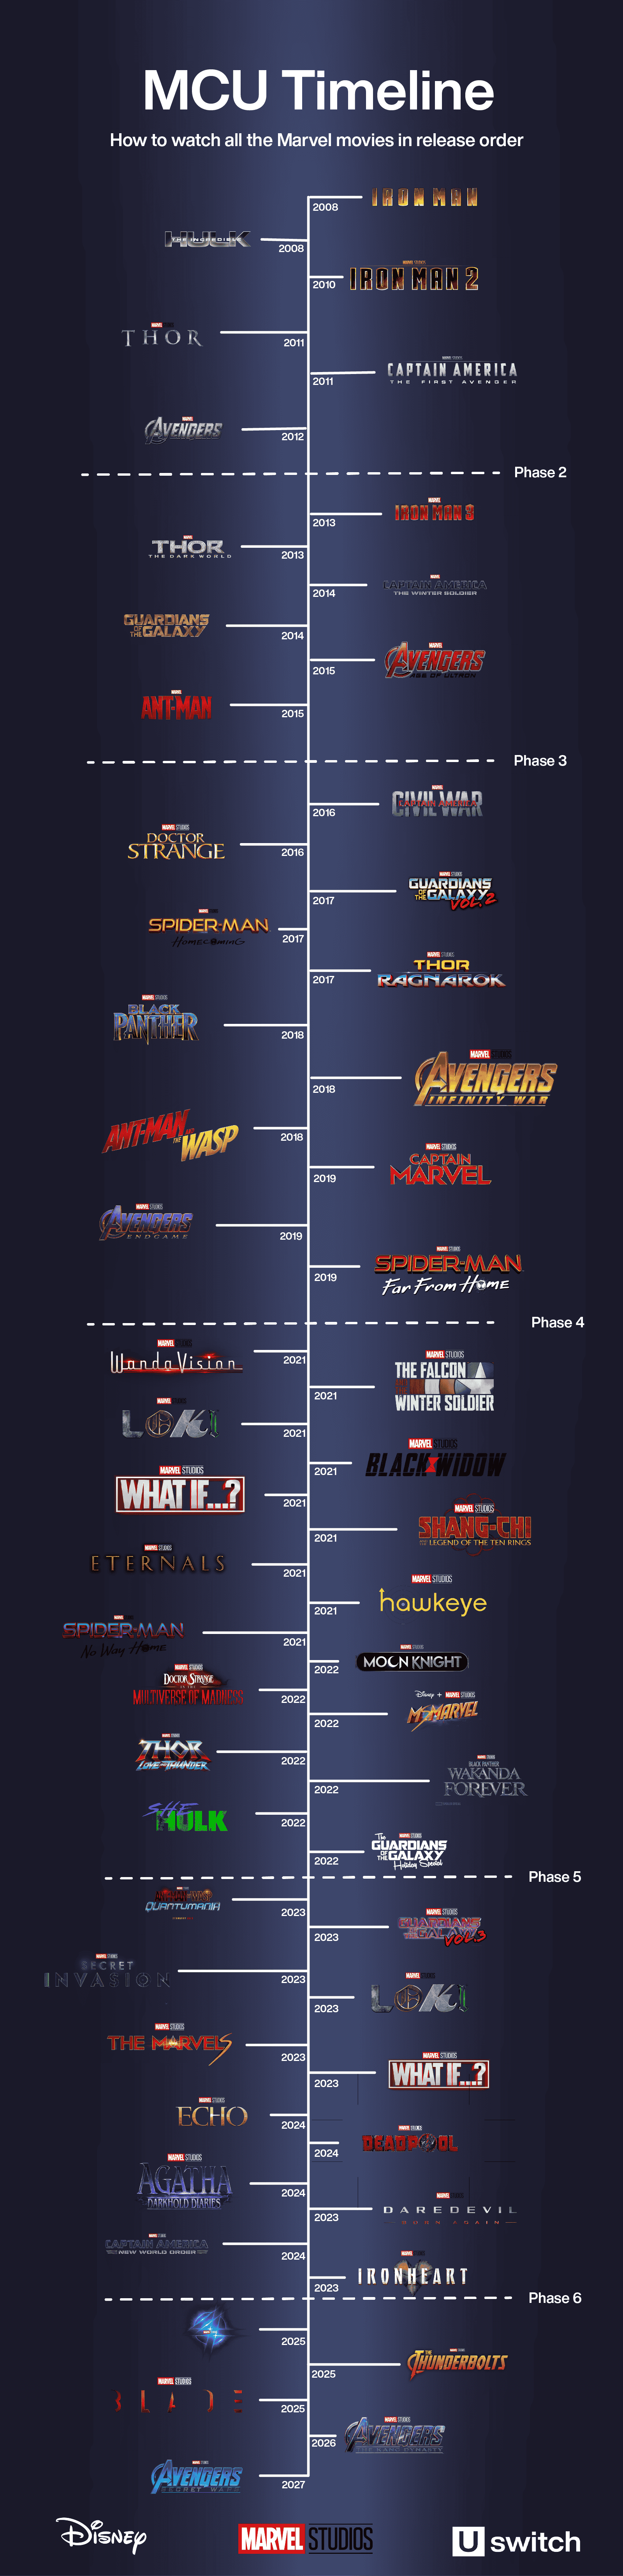 How to Watch the Marvel Movies in Order